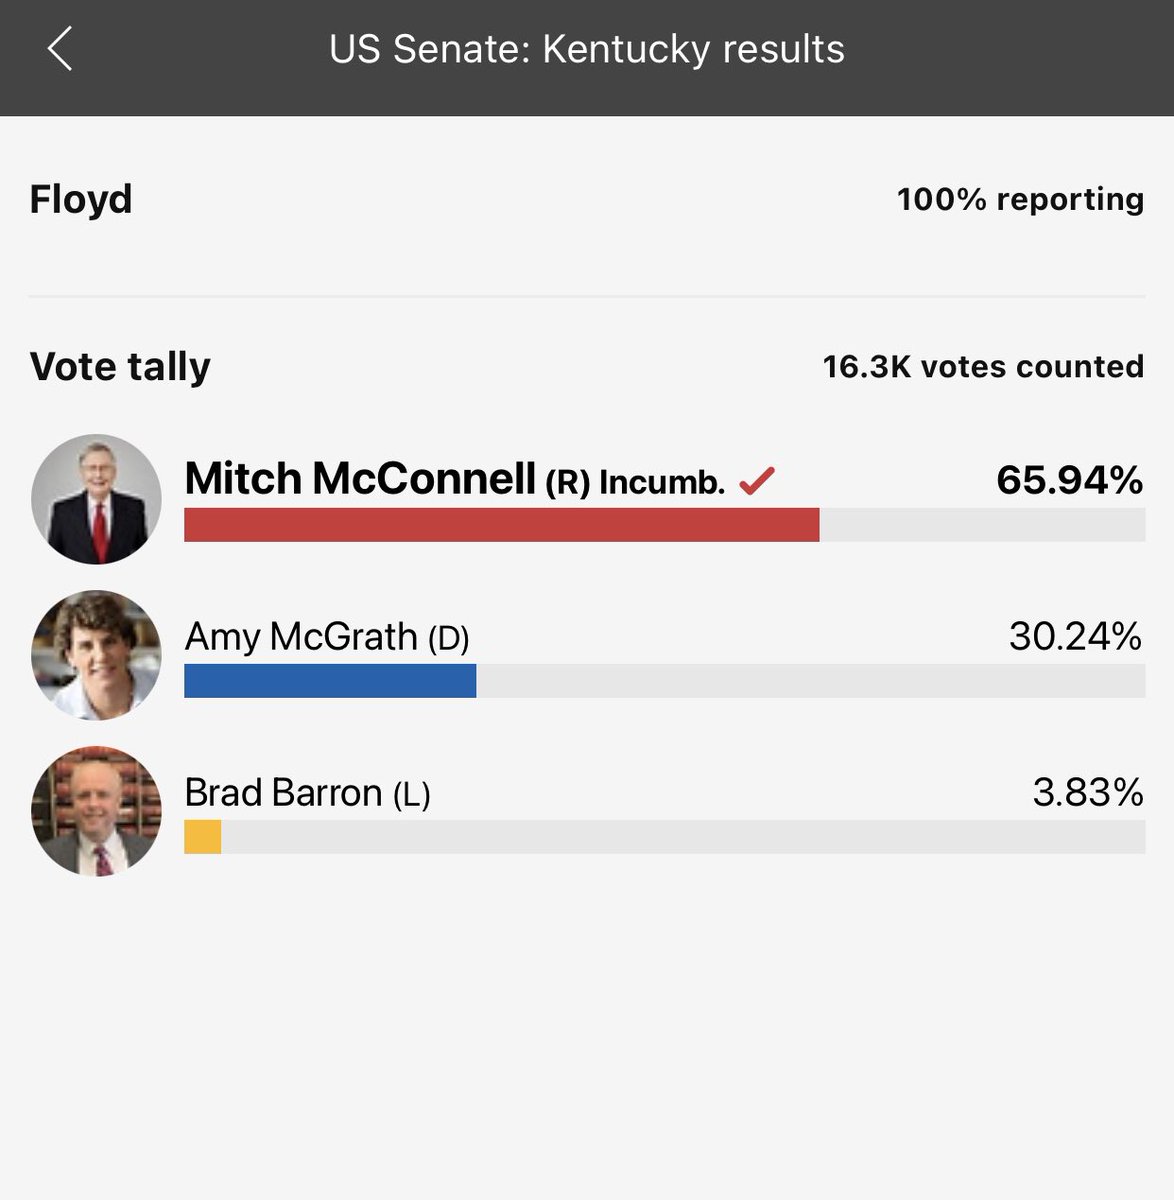 FLOYD - McConnell won by 65.94% of 16.3k votes. That’s roughly 10,748 votes for McConnel. Floyd County has 6,236 registered Republican voters as of 10/10/20202/4